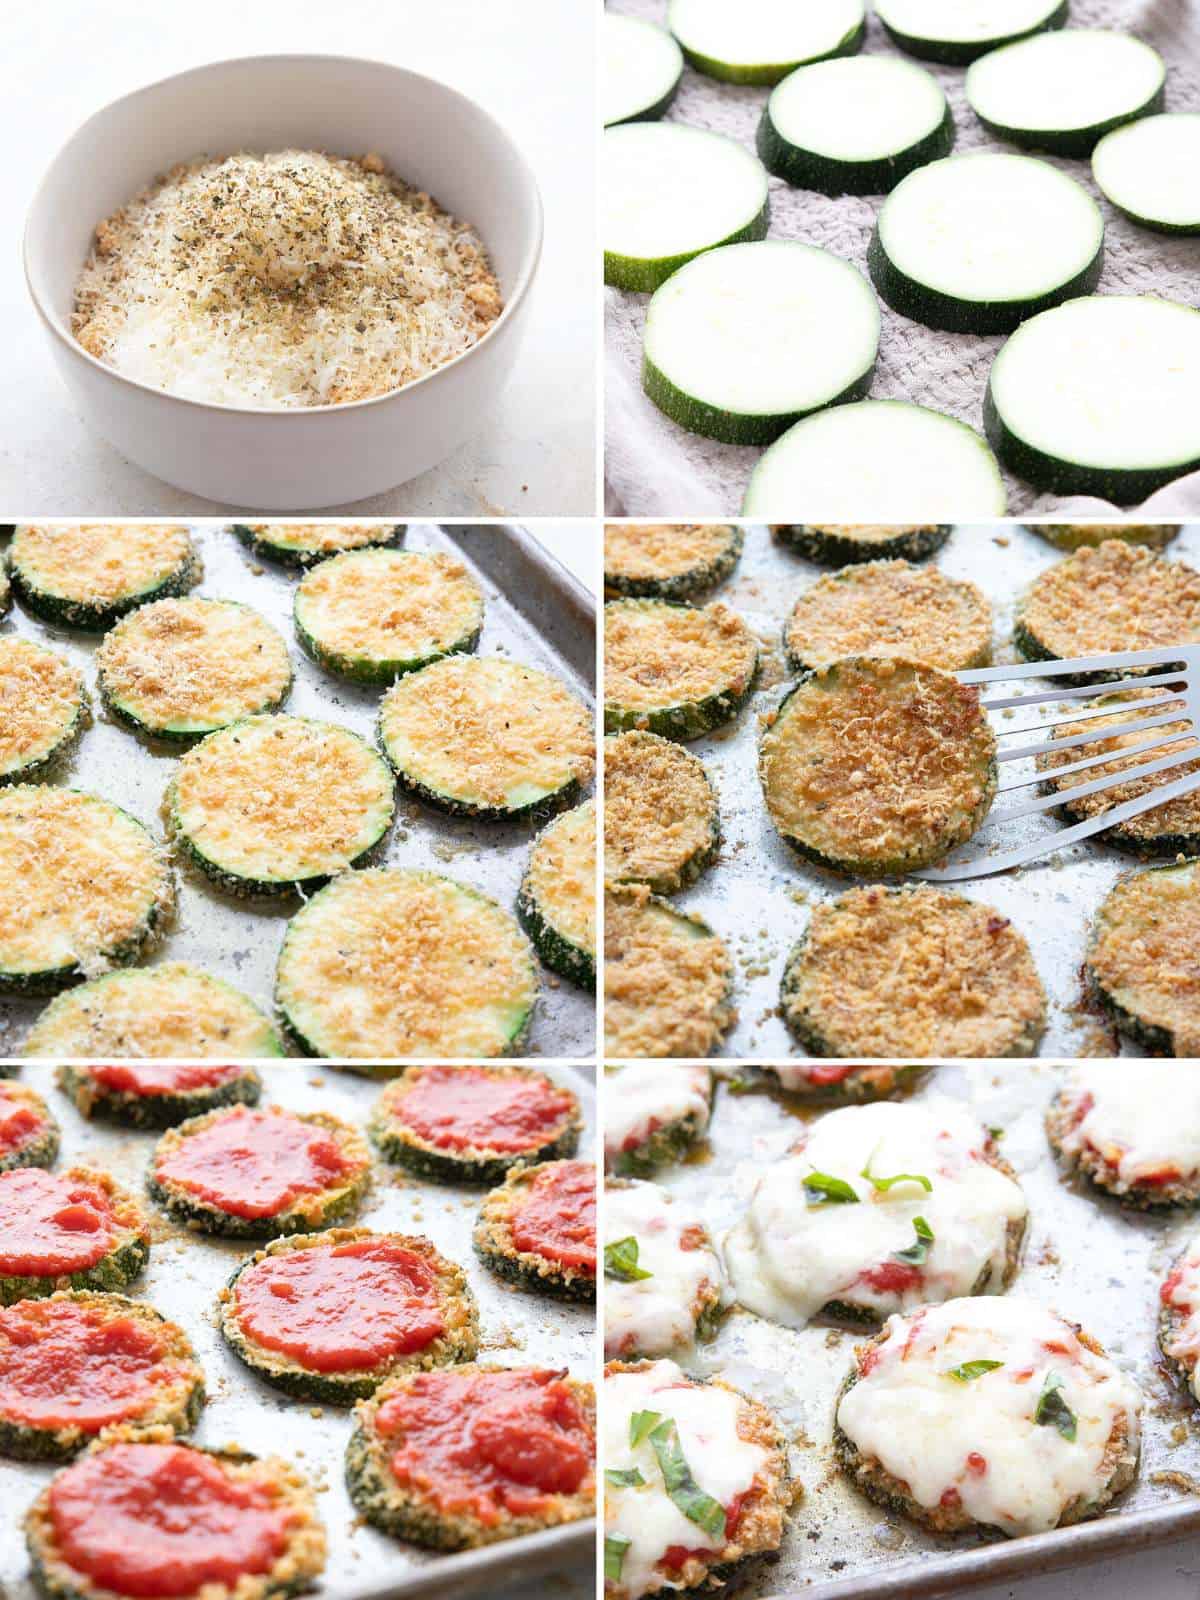 A collage of 6 images showing how to make zucchini parmesan.